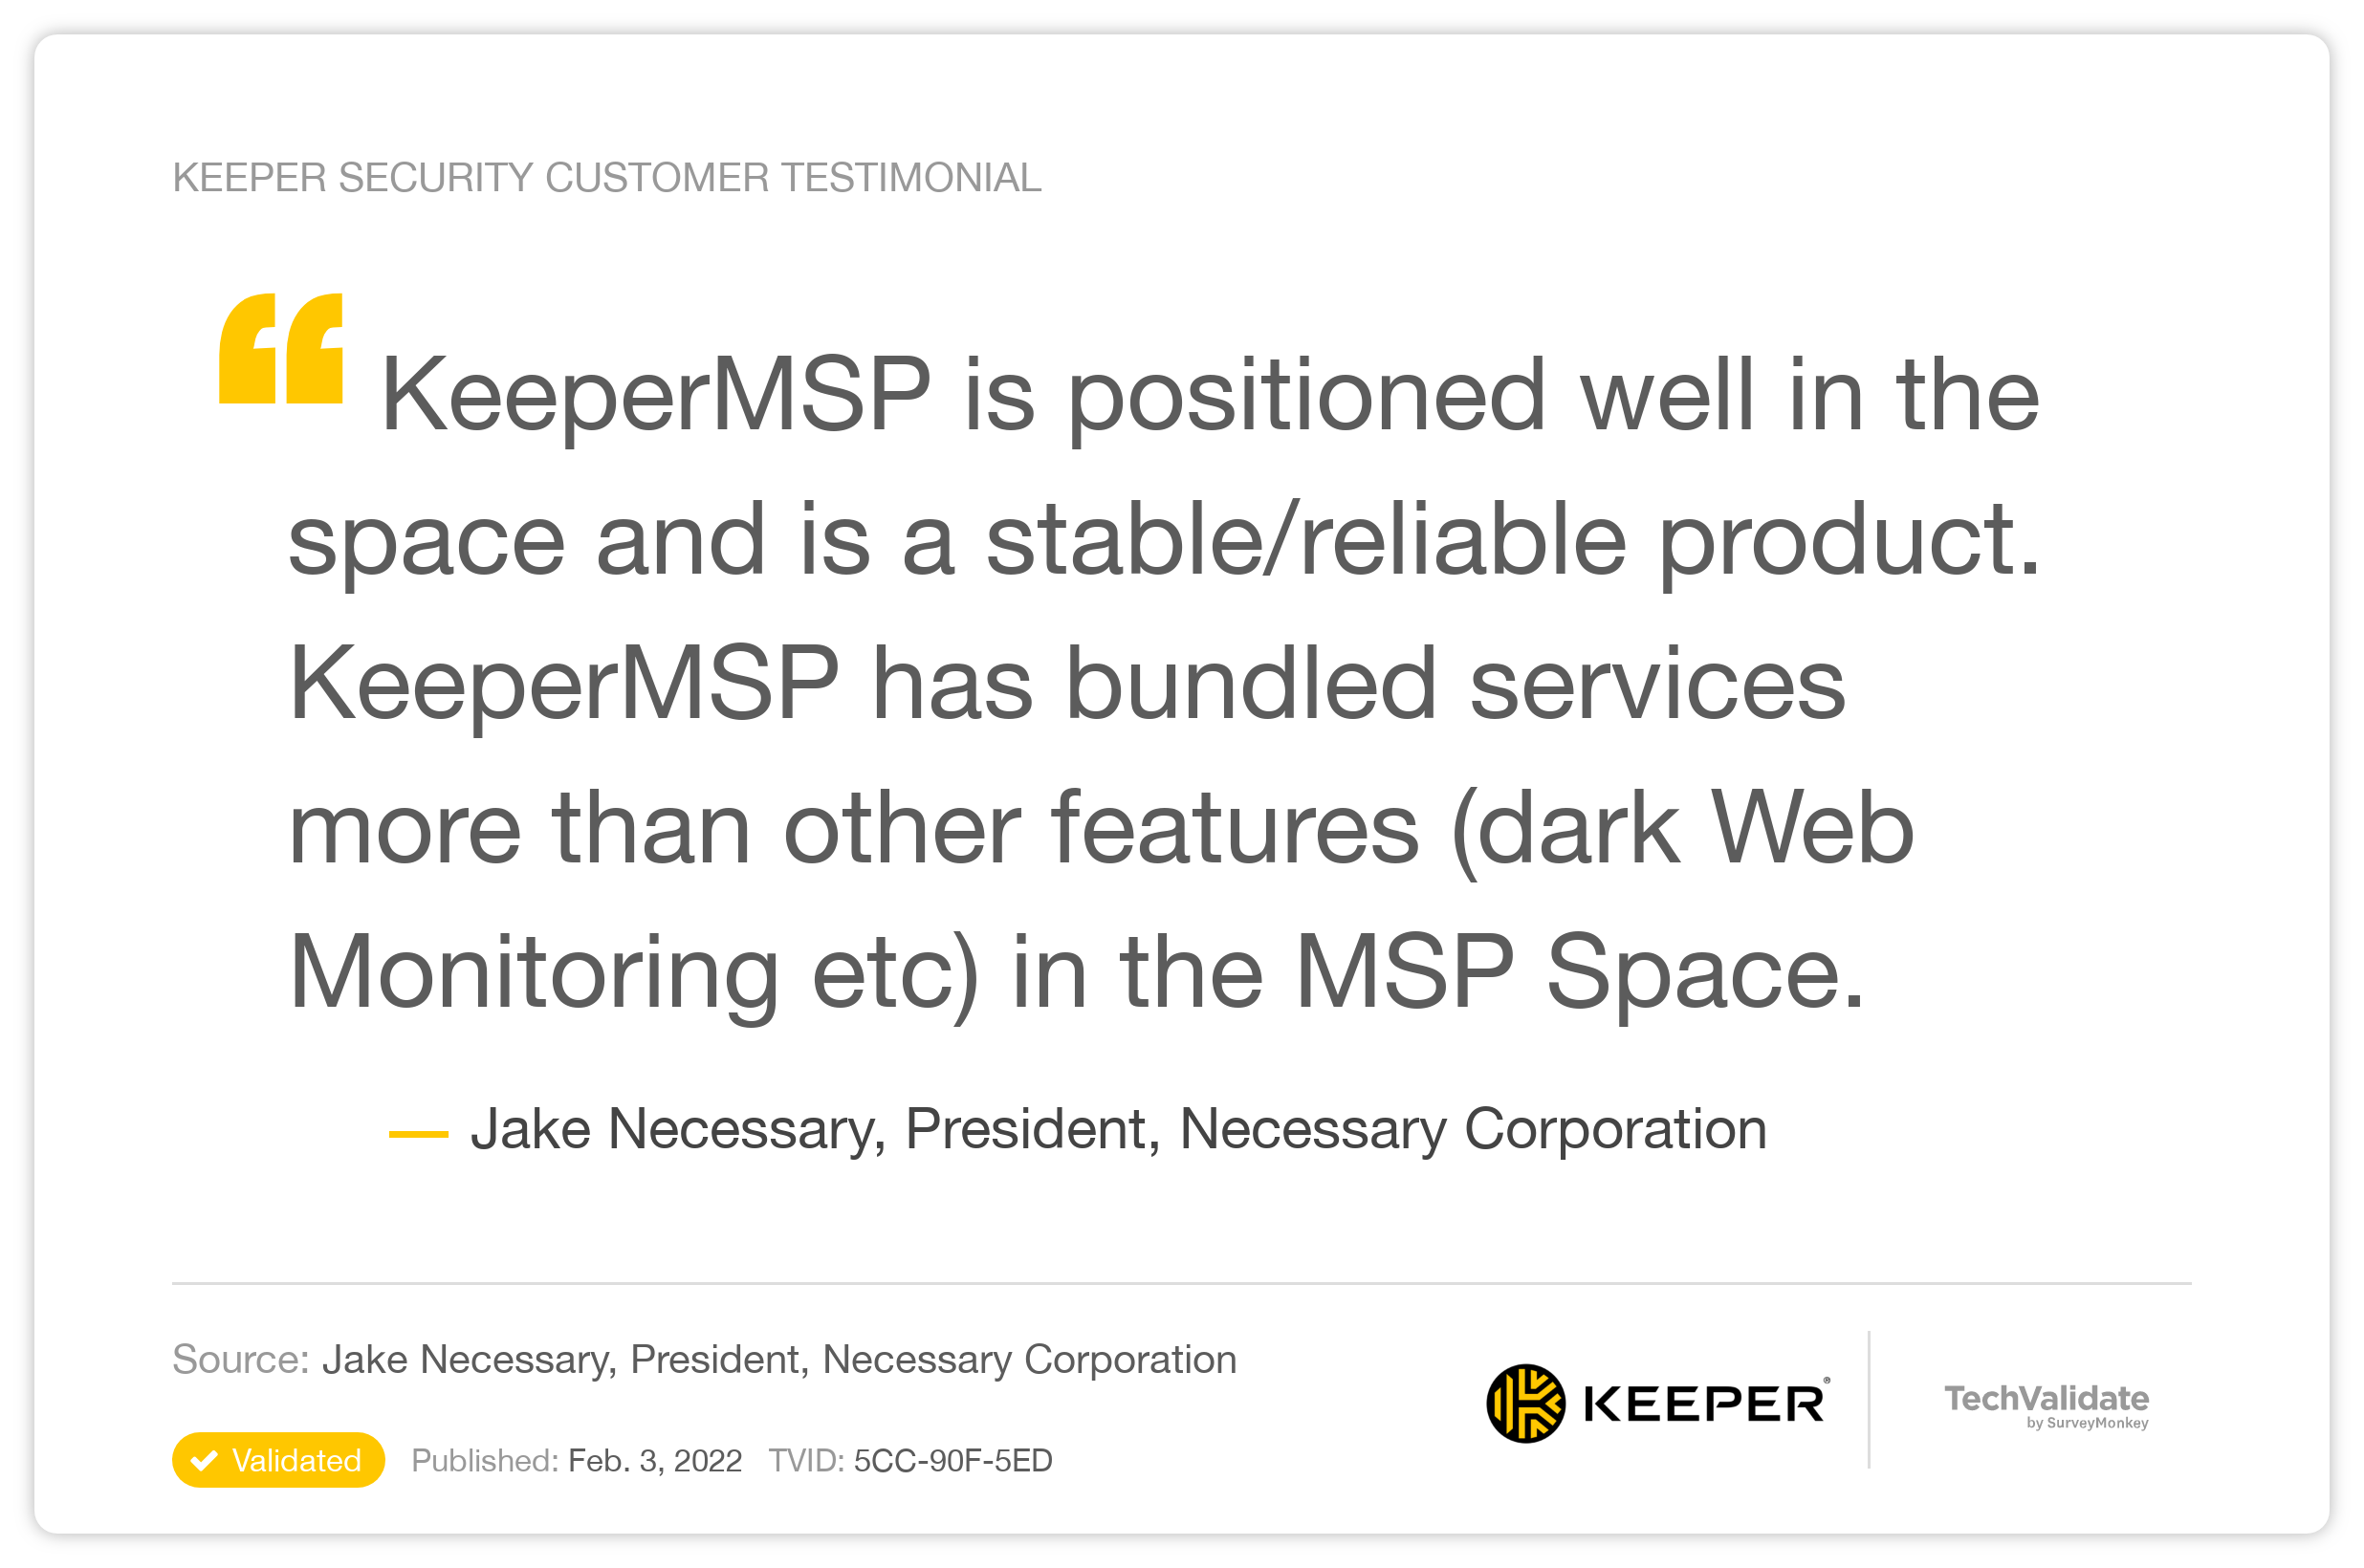 KeeperMSP is positioned well in the space and is a stable/reliable product. KeeperMSP has bundled services more than other features (dark Web Monitoring etc) in the MSP Space.